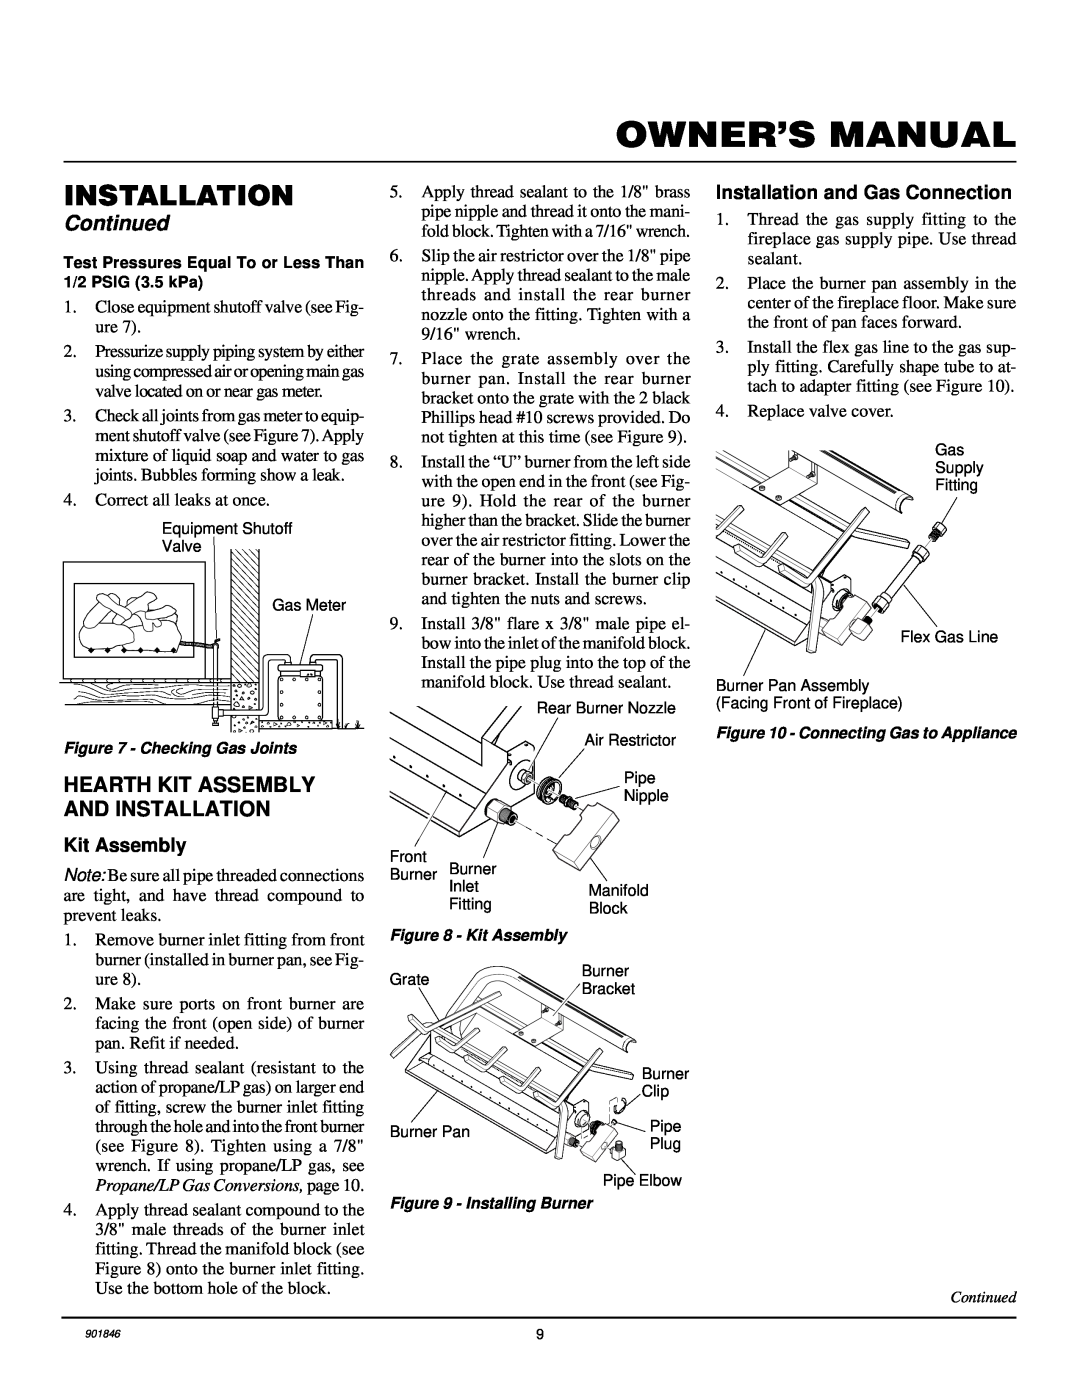 FMI FVTR24, FVTR18 installation manual Continued, Hearth Kit Assembly And Installation, Installation and Gas Connection 